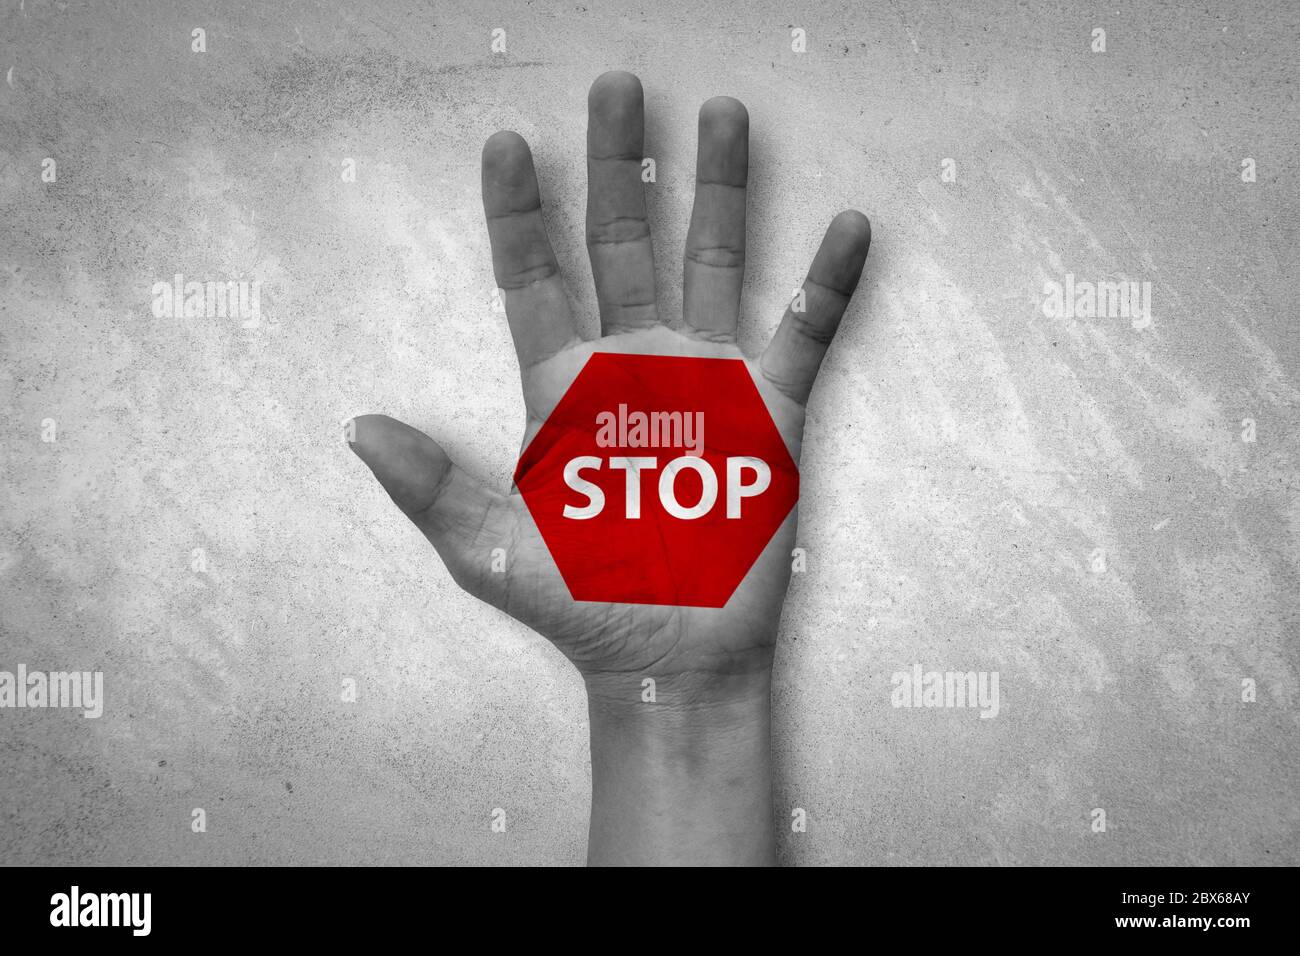 Hand raised with stop sign painted. Emotional black and white photo with red symbol. Stock Photo